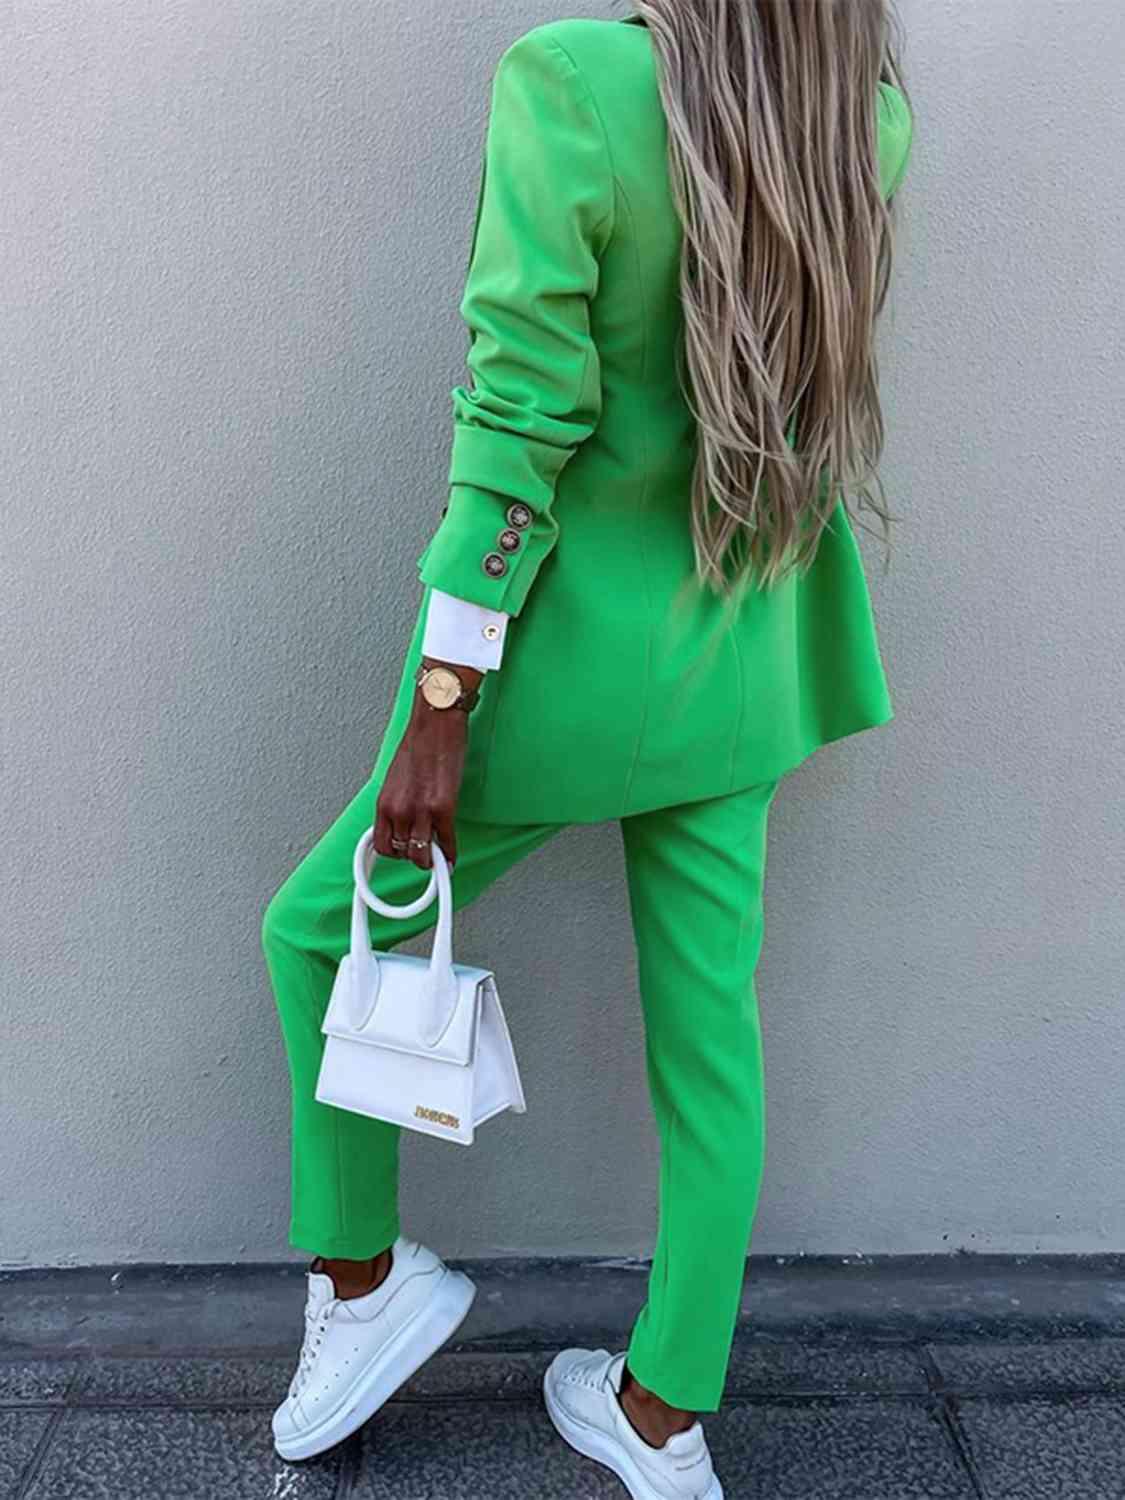 a woman in a green suit leaning against a wall